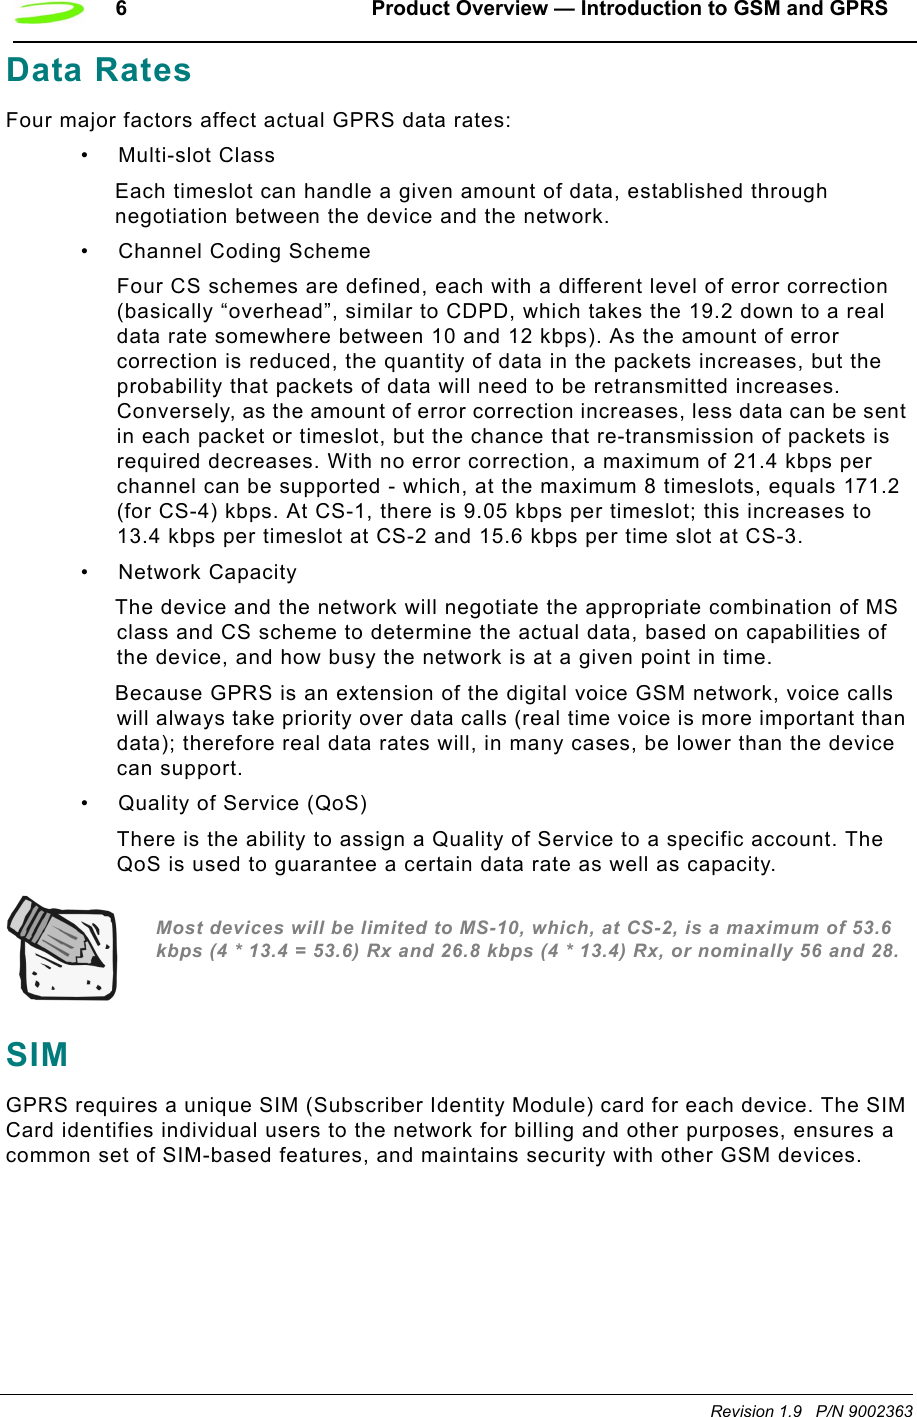 6 Product Overview — Introduction to GSM and GPRSRevision 1.9   P/N 9002363Data RatesFour major factors affect actual GPRS data rates:•Multi-slot ClassEach timeslot can handle a given amount of data, established through negotiation between the device and the network.• Channel Coding SchemeFour CS schemes are defined, each with a different level of error correction (basically “overhead”, similar to CDPD, which takes the 19.2 down to a real data rate somewhere between 10 and 12 kbps). As the amount of error correction is reduced, the quantity of data in the packets increases, but the probability that packets of data will need to be retransmitted increases. Conversely, as the amount of error correction increases, less data can be sent in each packet or timeslot, but the chance that re-transmission of packets is required decreases. With no error correction, a maximum of 21.4 kbps per channel can be supported - which, at the maximum 8 timeslots, equals 171.2 (for CS-4) kbps. At CS-1, there is 9.05 kbps per timeslot; this increases to 13.4 kbps per timeslot at CS-2 and 15.6 kbps per time slot at CS-3.• Network CapacityThe device and the network will negotiate the appropriate combination of MS class and CS scheme to determine the actual data, based on capabilities of the device, and how busy the network is at a given point in time.Because GPRS is an extension of the digital voice GSM network, voice calls will always take priority over data calls (real time voice is more important than data); therefore real data rates will, in many cases, be lower than the device can support.• Quality of Service (QoS)There is the ability to assign a Quality of Service to a specific account. The QoS is used to guarantee a certain data rate as well as capacity.Most devices will be limited to MS-10, which, at CS-2, is a maximum of 53.6 kbps (4 * 13.4 = 53.6) Rx and 26.8 kbps (4 * 13.4) Rx, or nominally 56 and 28.SIMGPRS requires a unique SIM (Subscriber Identity Module) card for each device. The SIM Card identifies individual users to the network for billing and other purposes, ensures a common set of SIM-based features, and maintains security with other GSM devices. 